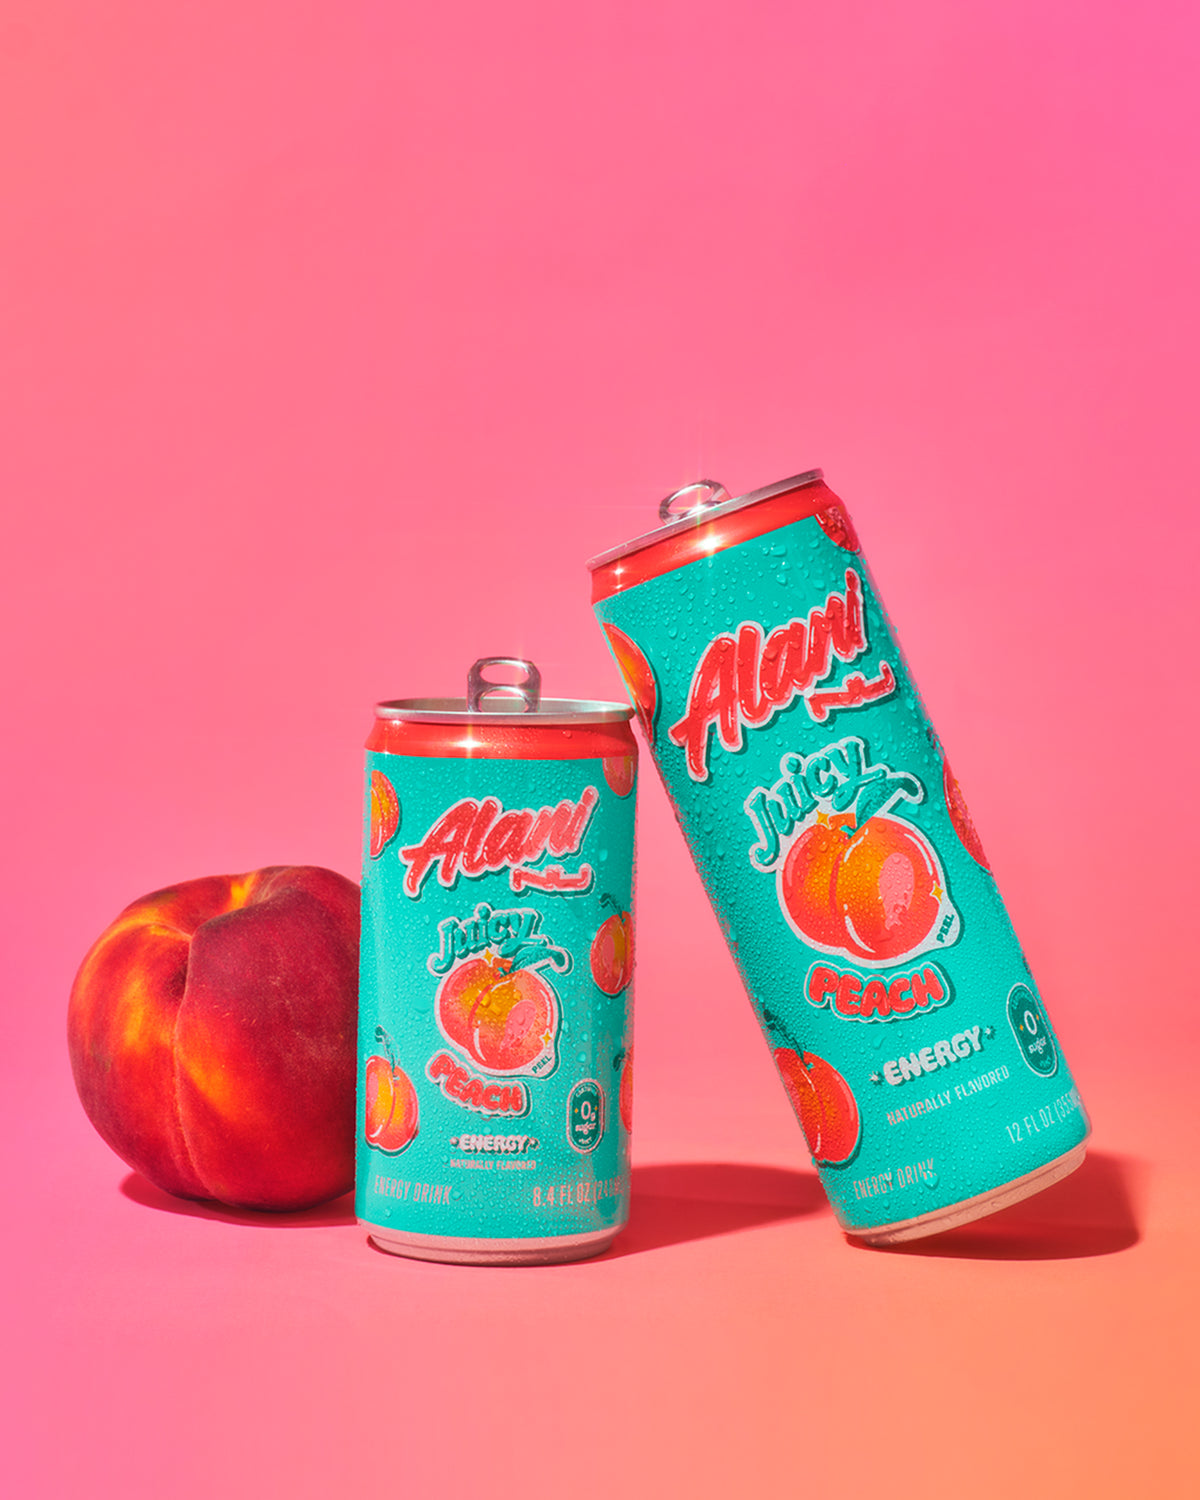 A Peach next to Mini Energy and regular size Energy Drink in Juicy Peach flavor.